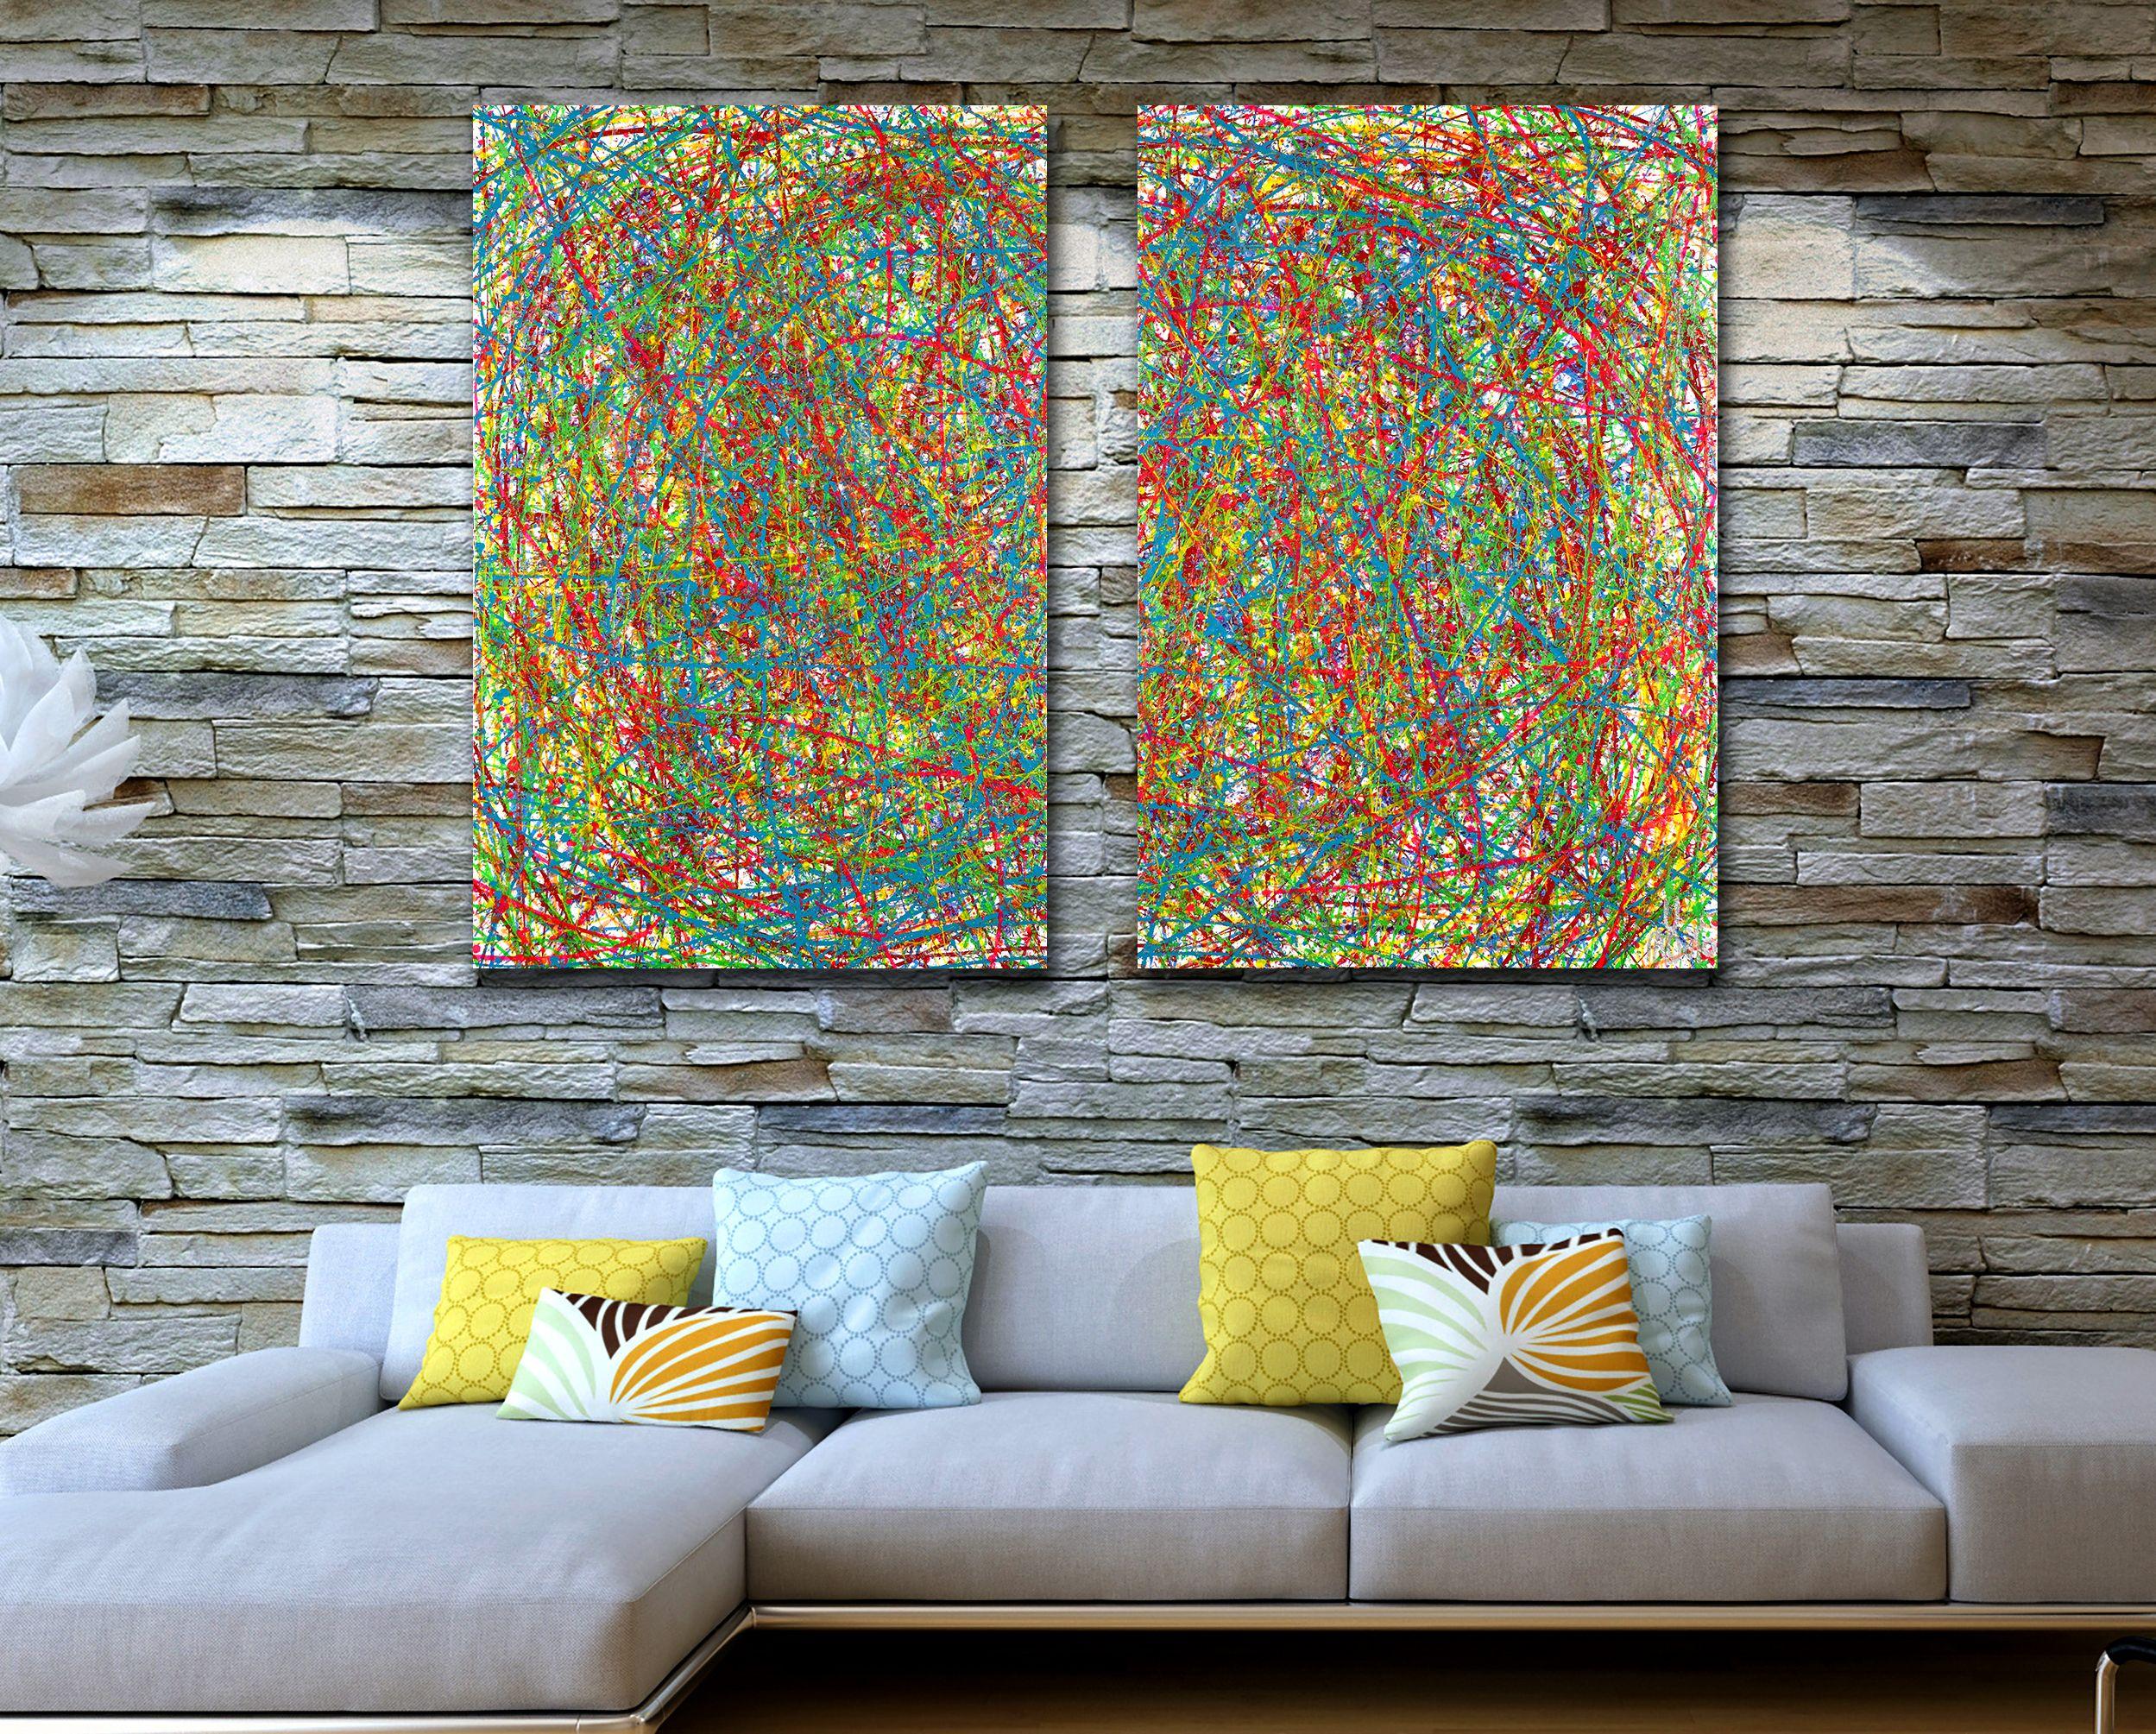 Expressionistic abstract painting with synchronized drizzles in turquoise blue, yellow, iridescent clear paint, green, red, orange, teal and lots of iridescence over pearly white. Completed with gestural motion and energy. Can be displayed in